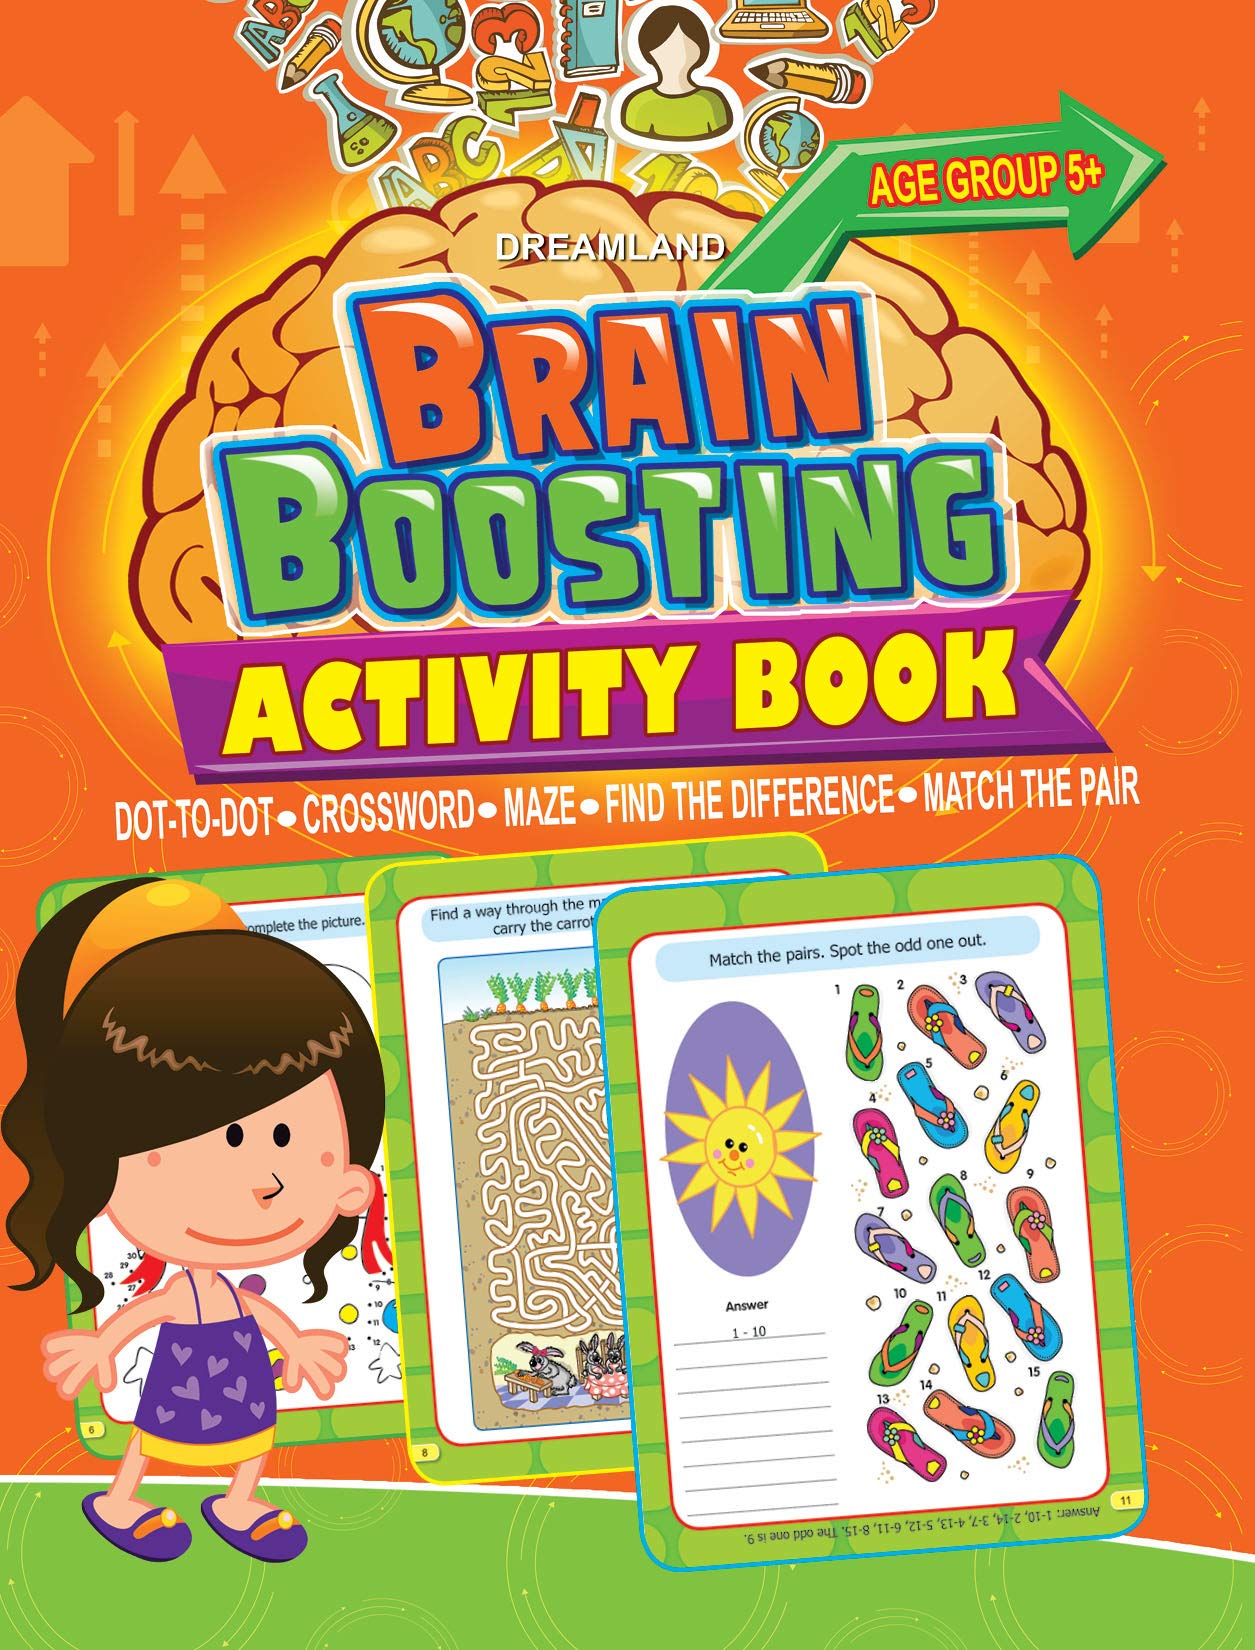 Brain Boosting Activity Book (Match the Pair, Find the Difference, Maze, Crossword, Dot-to-Dot)